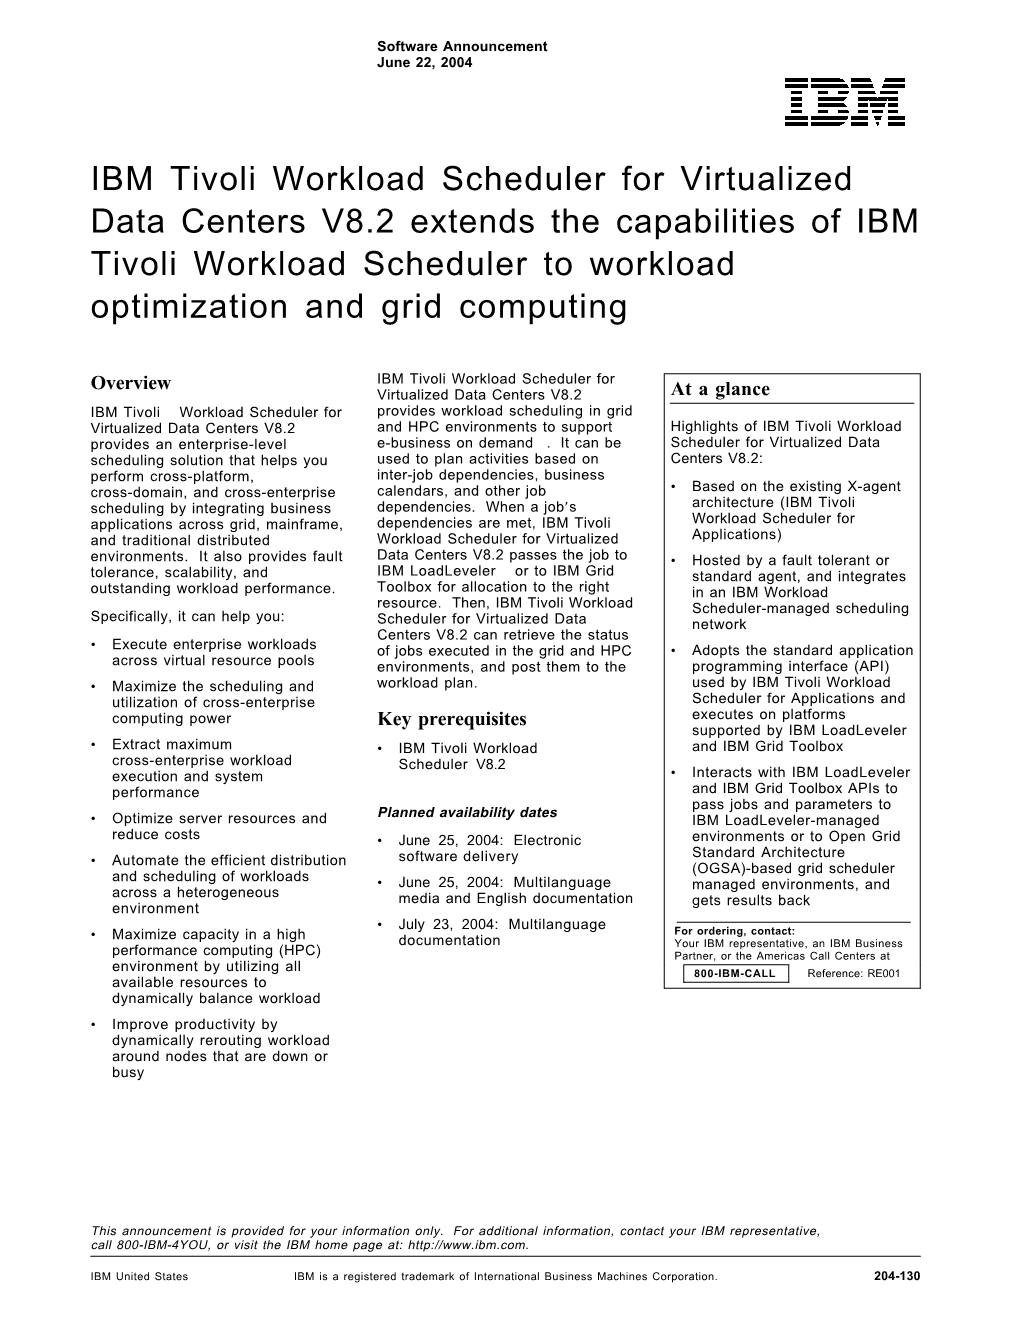 IBM Tivoli Workload Scheduler for Virtualized Data Centers V8.2 Extends the Capabilities of IBM Tivoli Workload Scheduler to Workload Optimization and Grid Computing